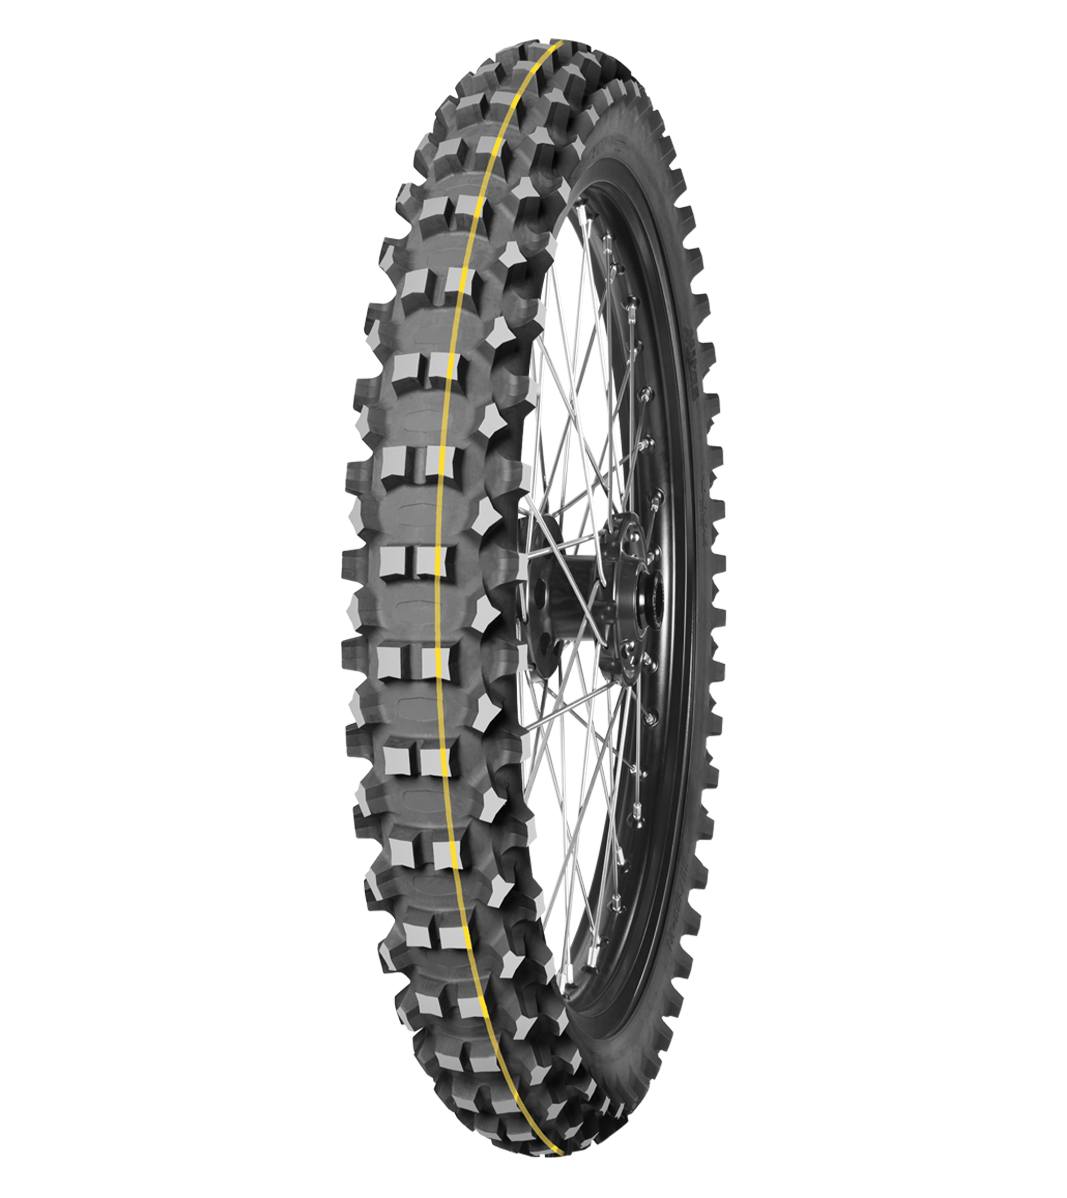 Mitas TERRA FORCE-MX MH 70/100-19 Enduro Competition Off-Road SUPER 42M Yellow Tube Front Tire, 226174, 70/100-19, Enduro Competition, Front, Off-Road, Terra Force, Terra Force-MX MH, Trail, Tires - Imported and distributed in North & South America by Lindeco Genuine Powersports - Premier Powersports Equipment and Accessories for Motorcycle Enthusiasts, Professional Riders and Dealers.